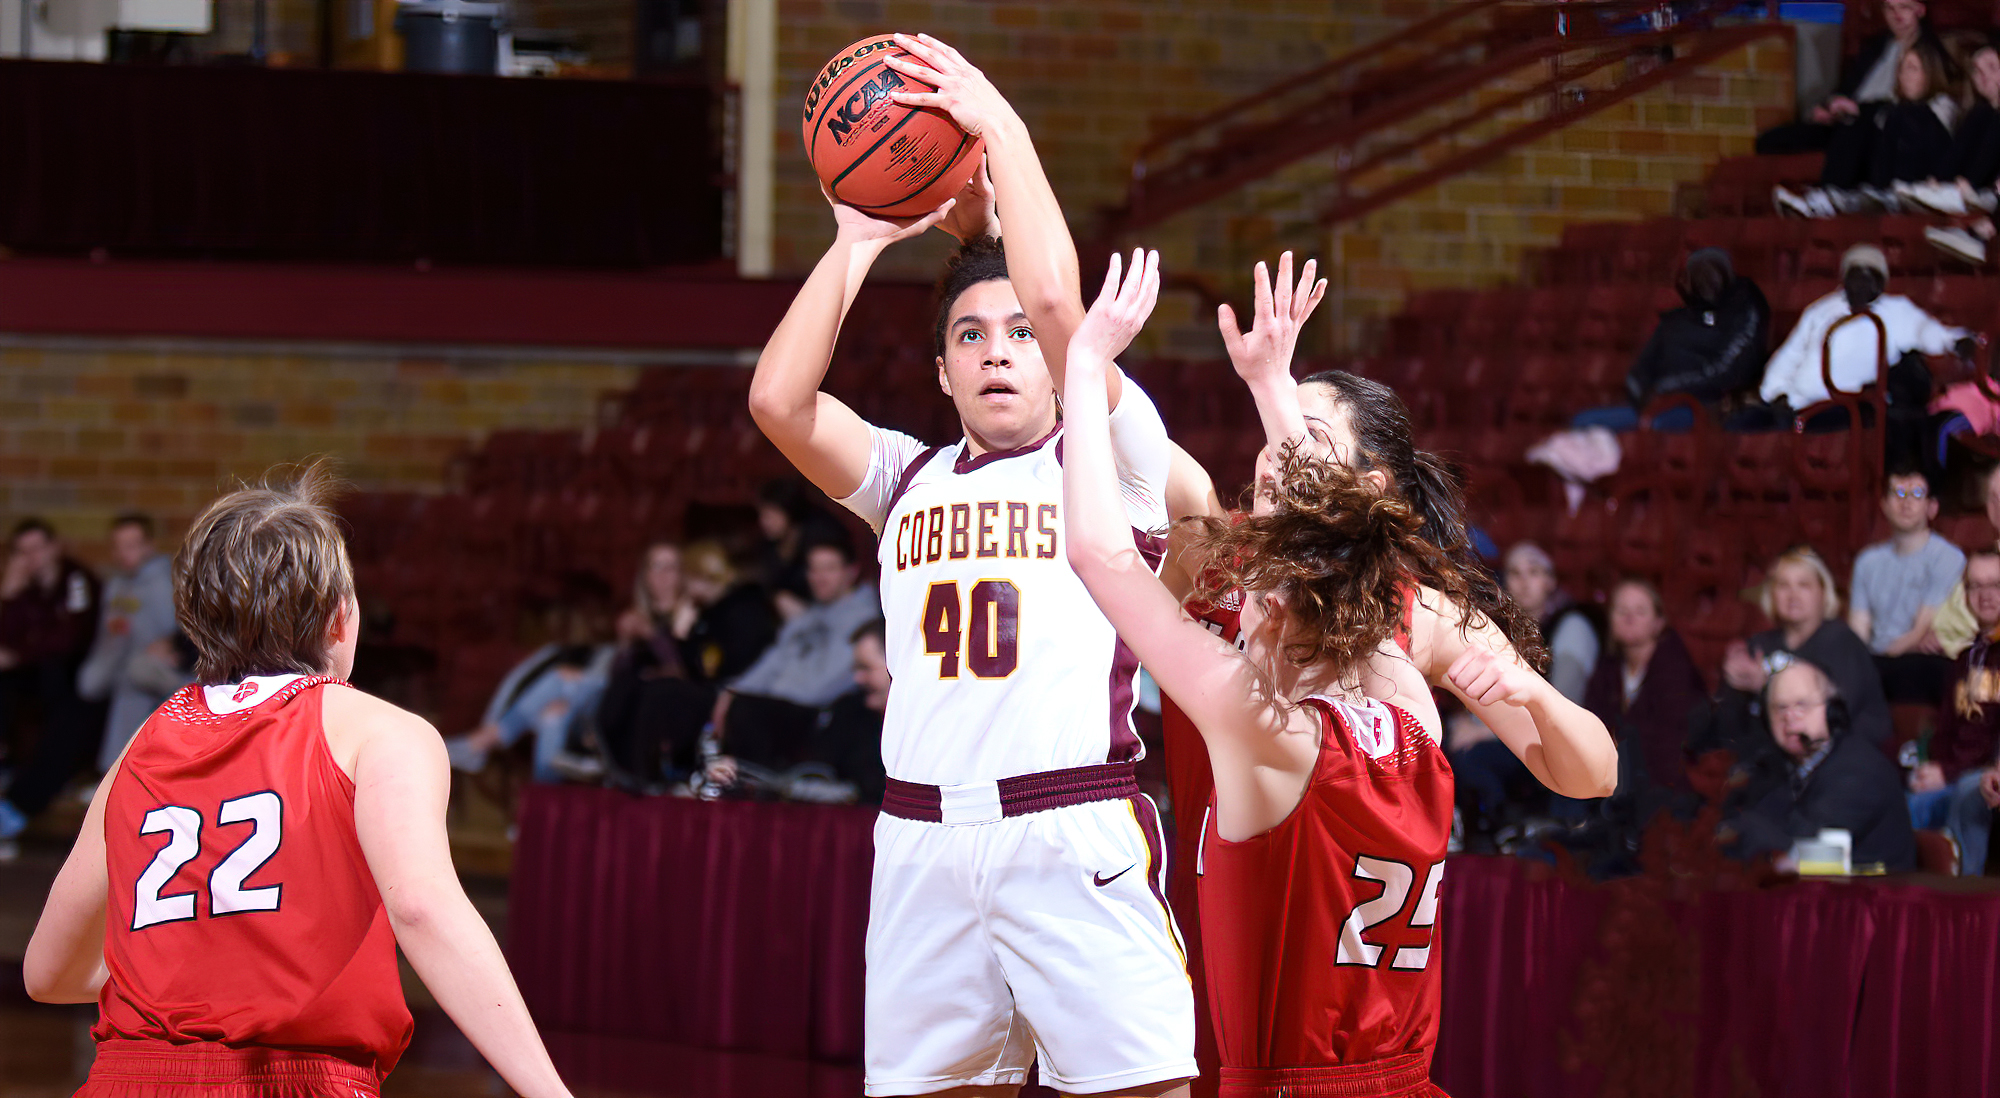 Sophomore Vanessa Kedl had a career-high 14 points in the Cobbers' season opener at St. Ben's. She was one of four CC players with at least 10 points in the game.